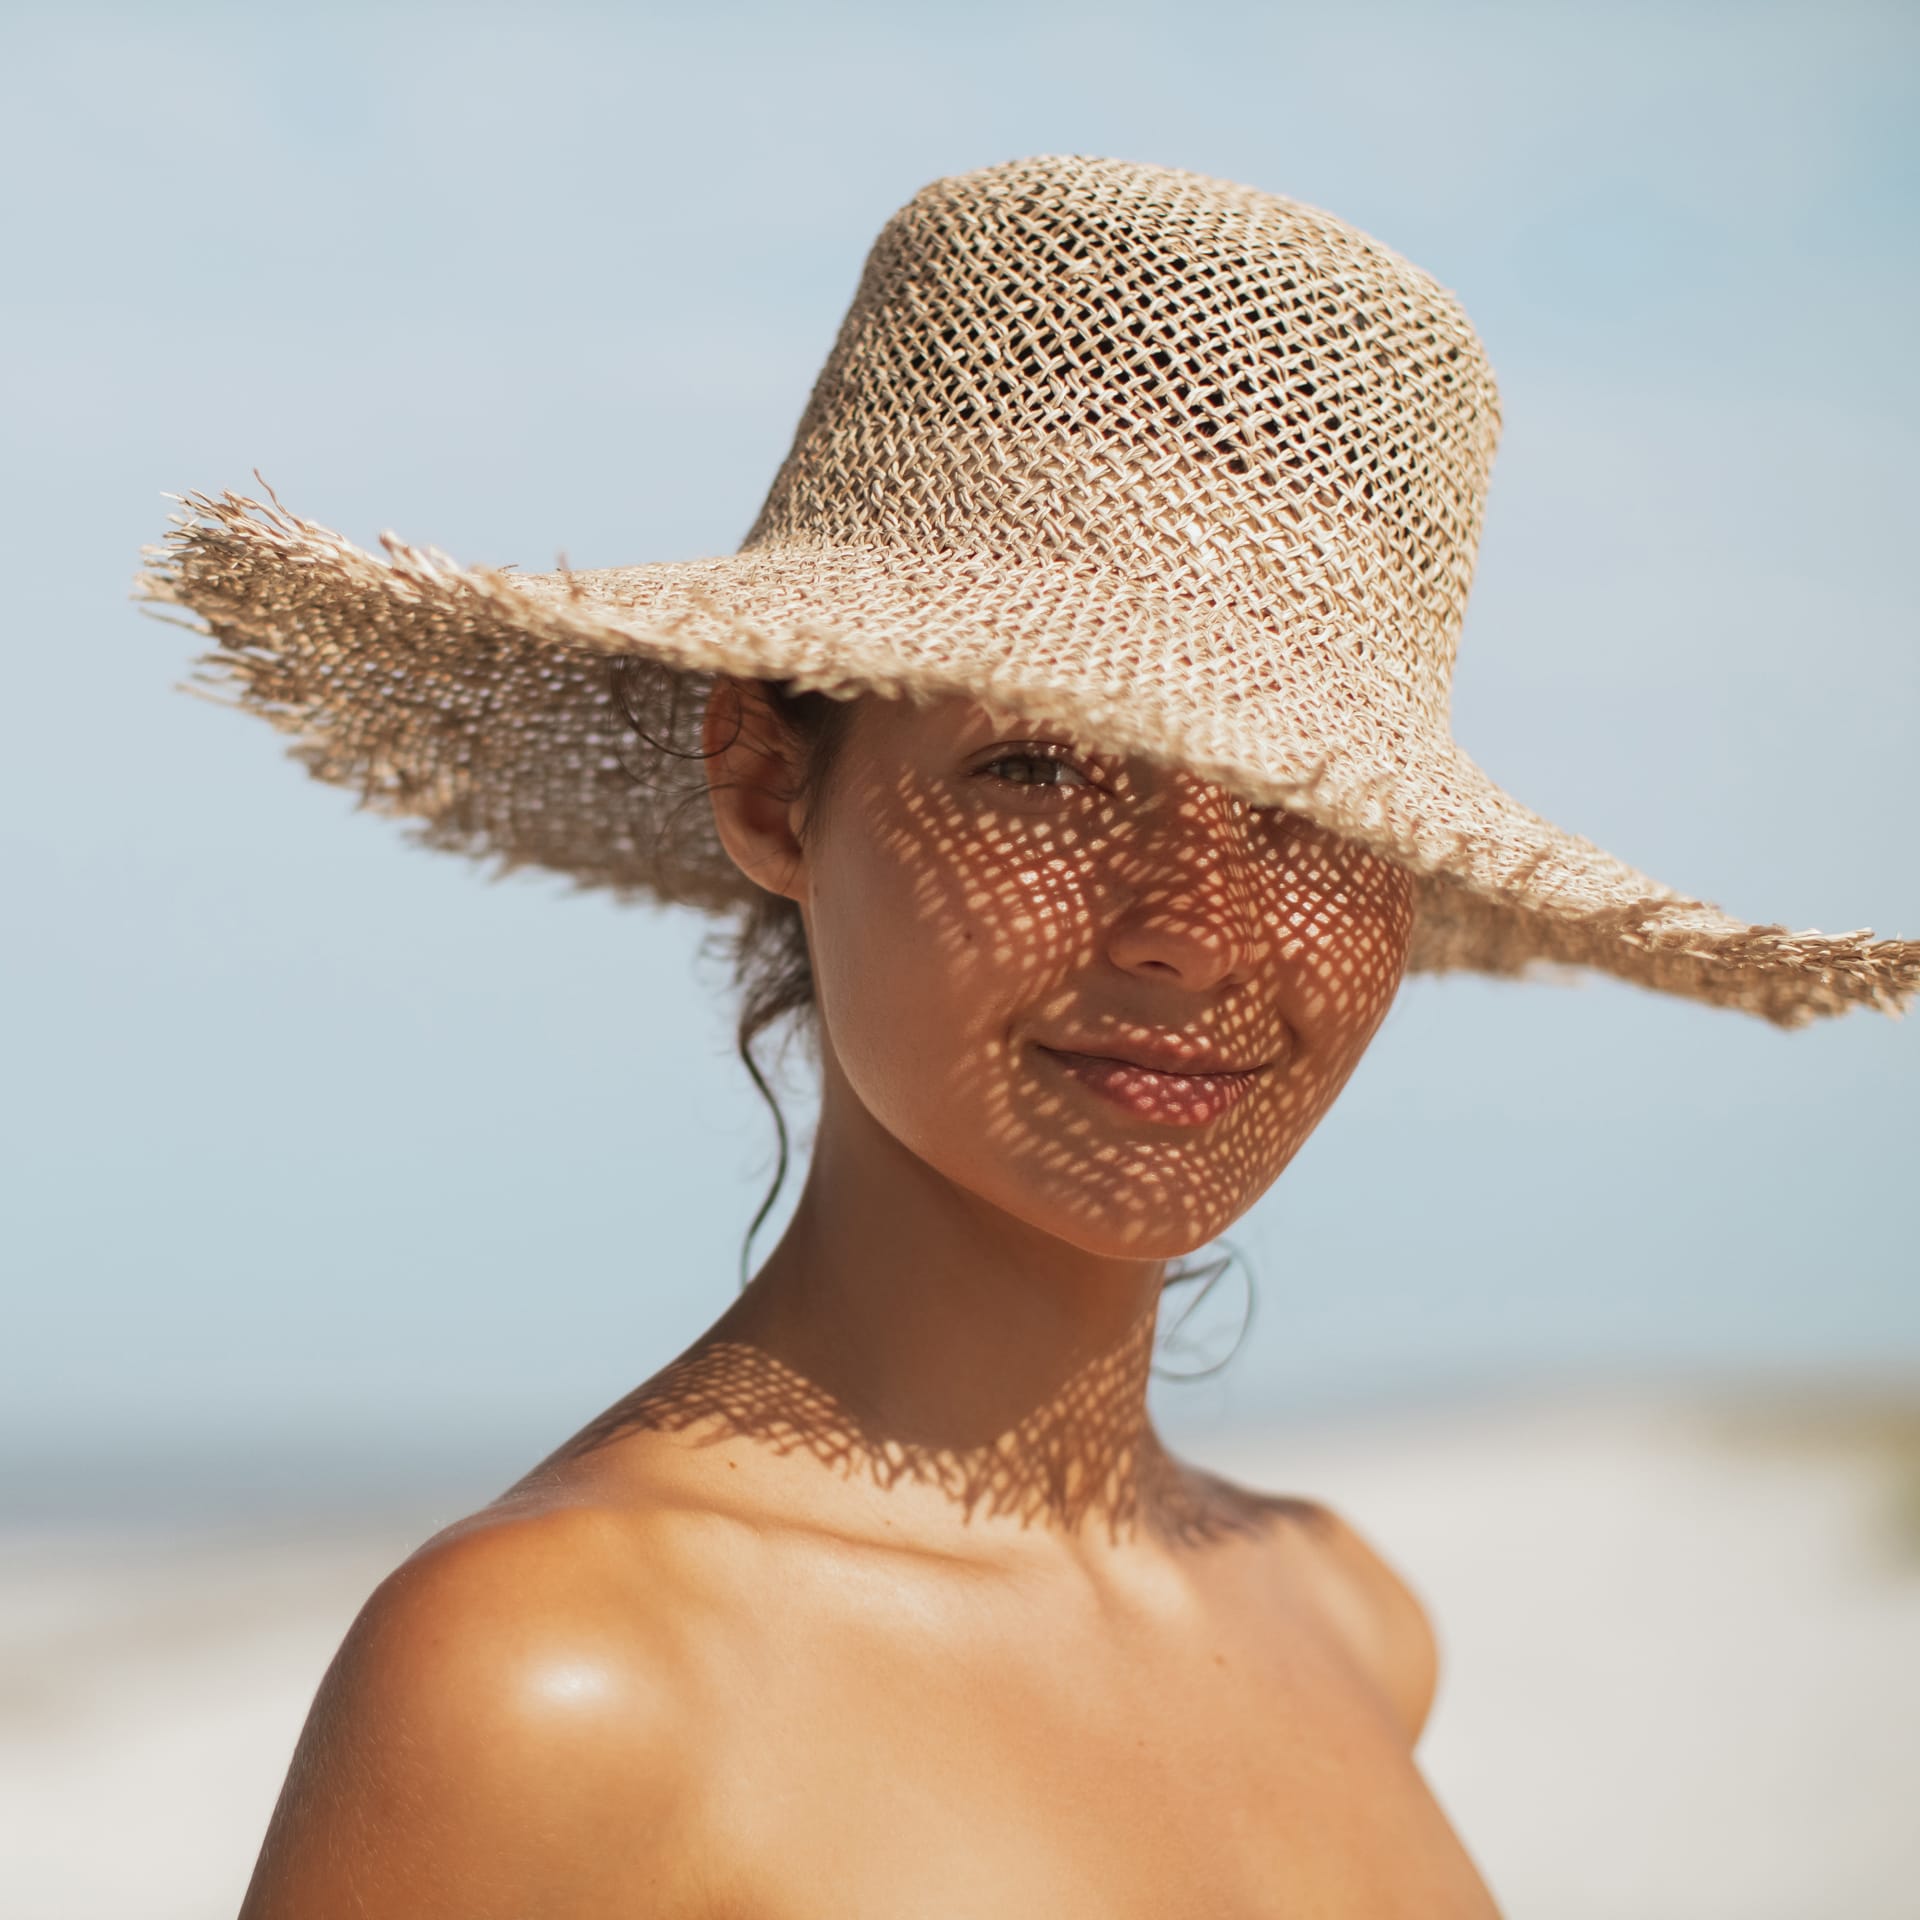 Pretty women pictures beach woman sun hat vacation